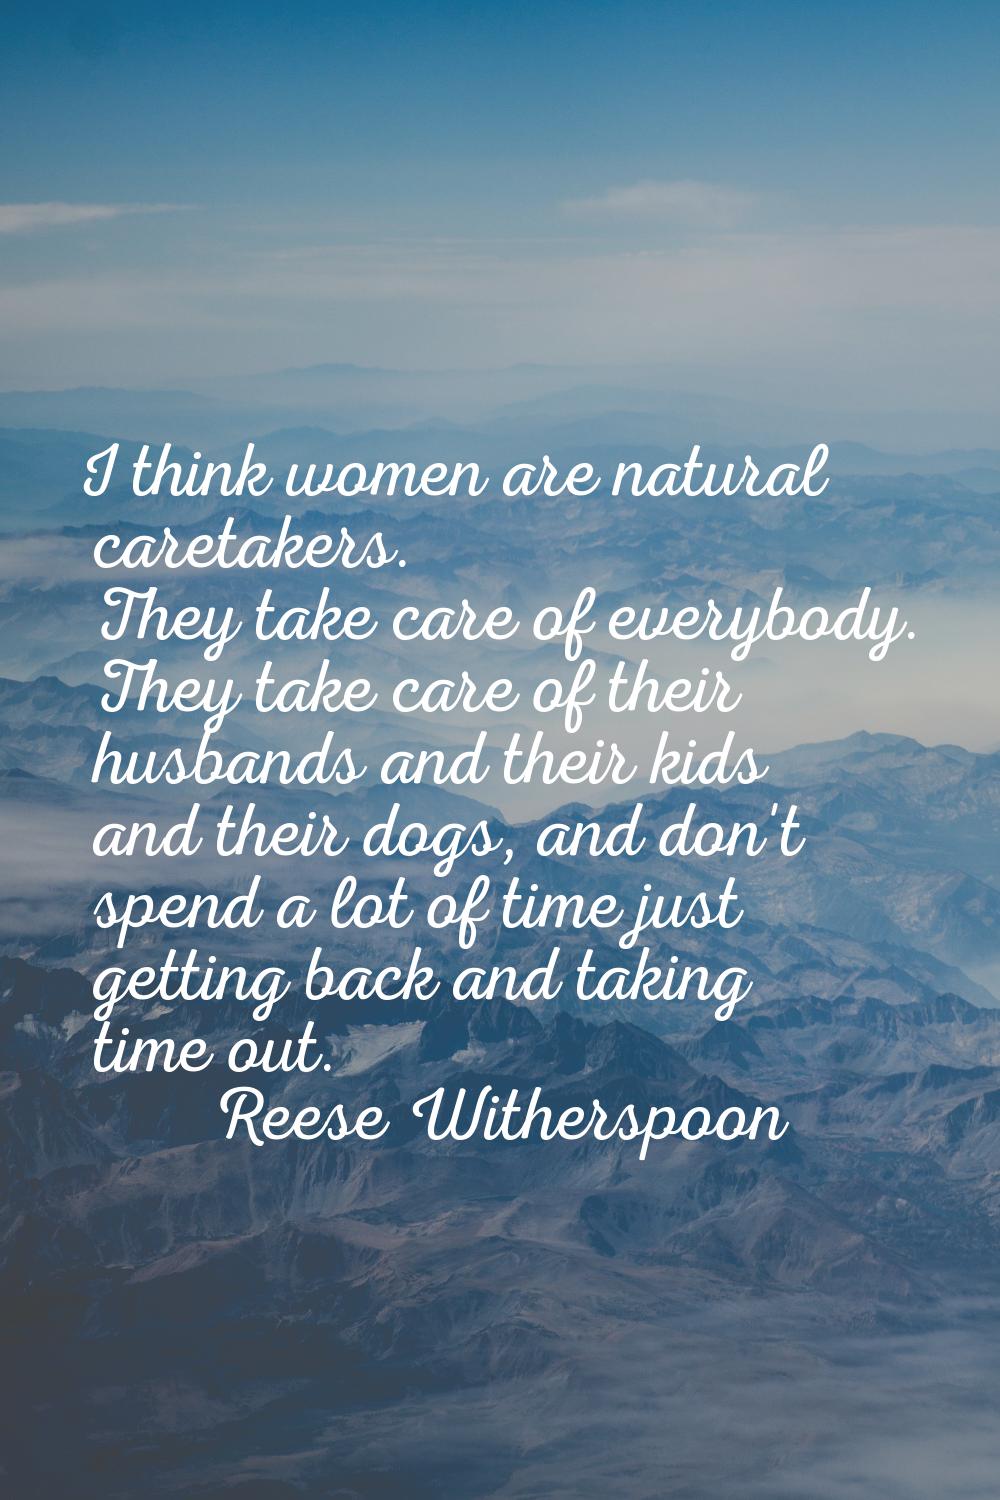 I think women are natural caretakers. They take care of everybody. They take care of their husbands